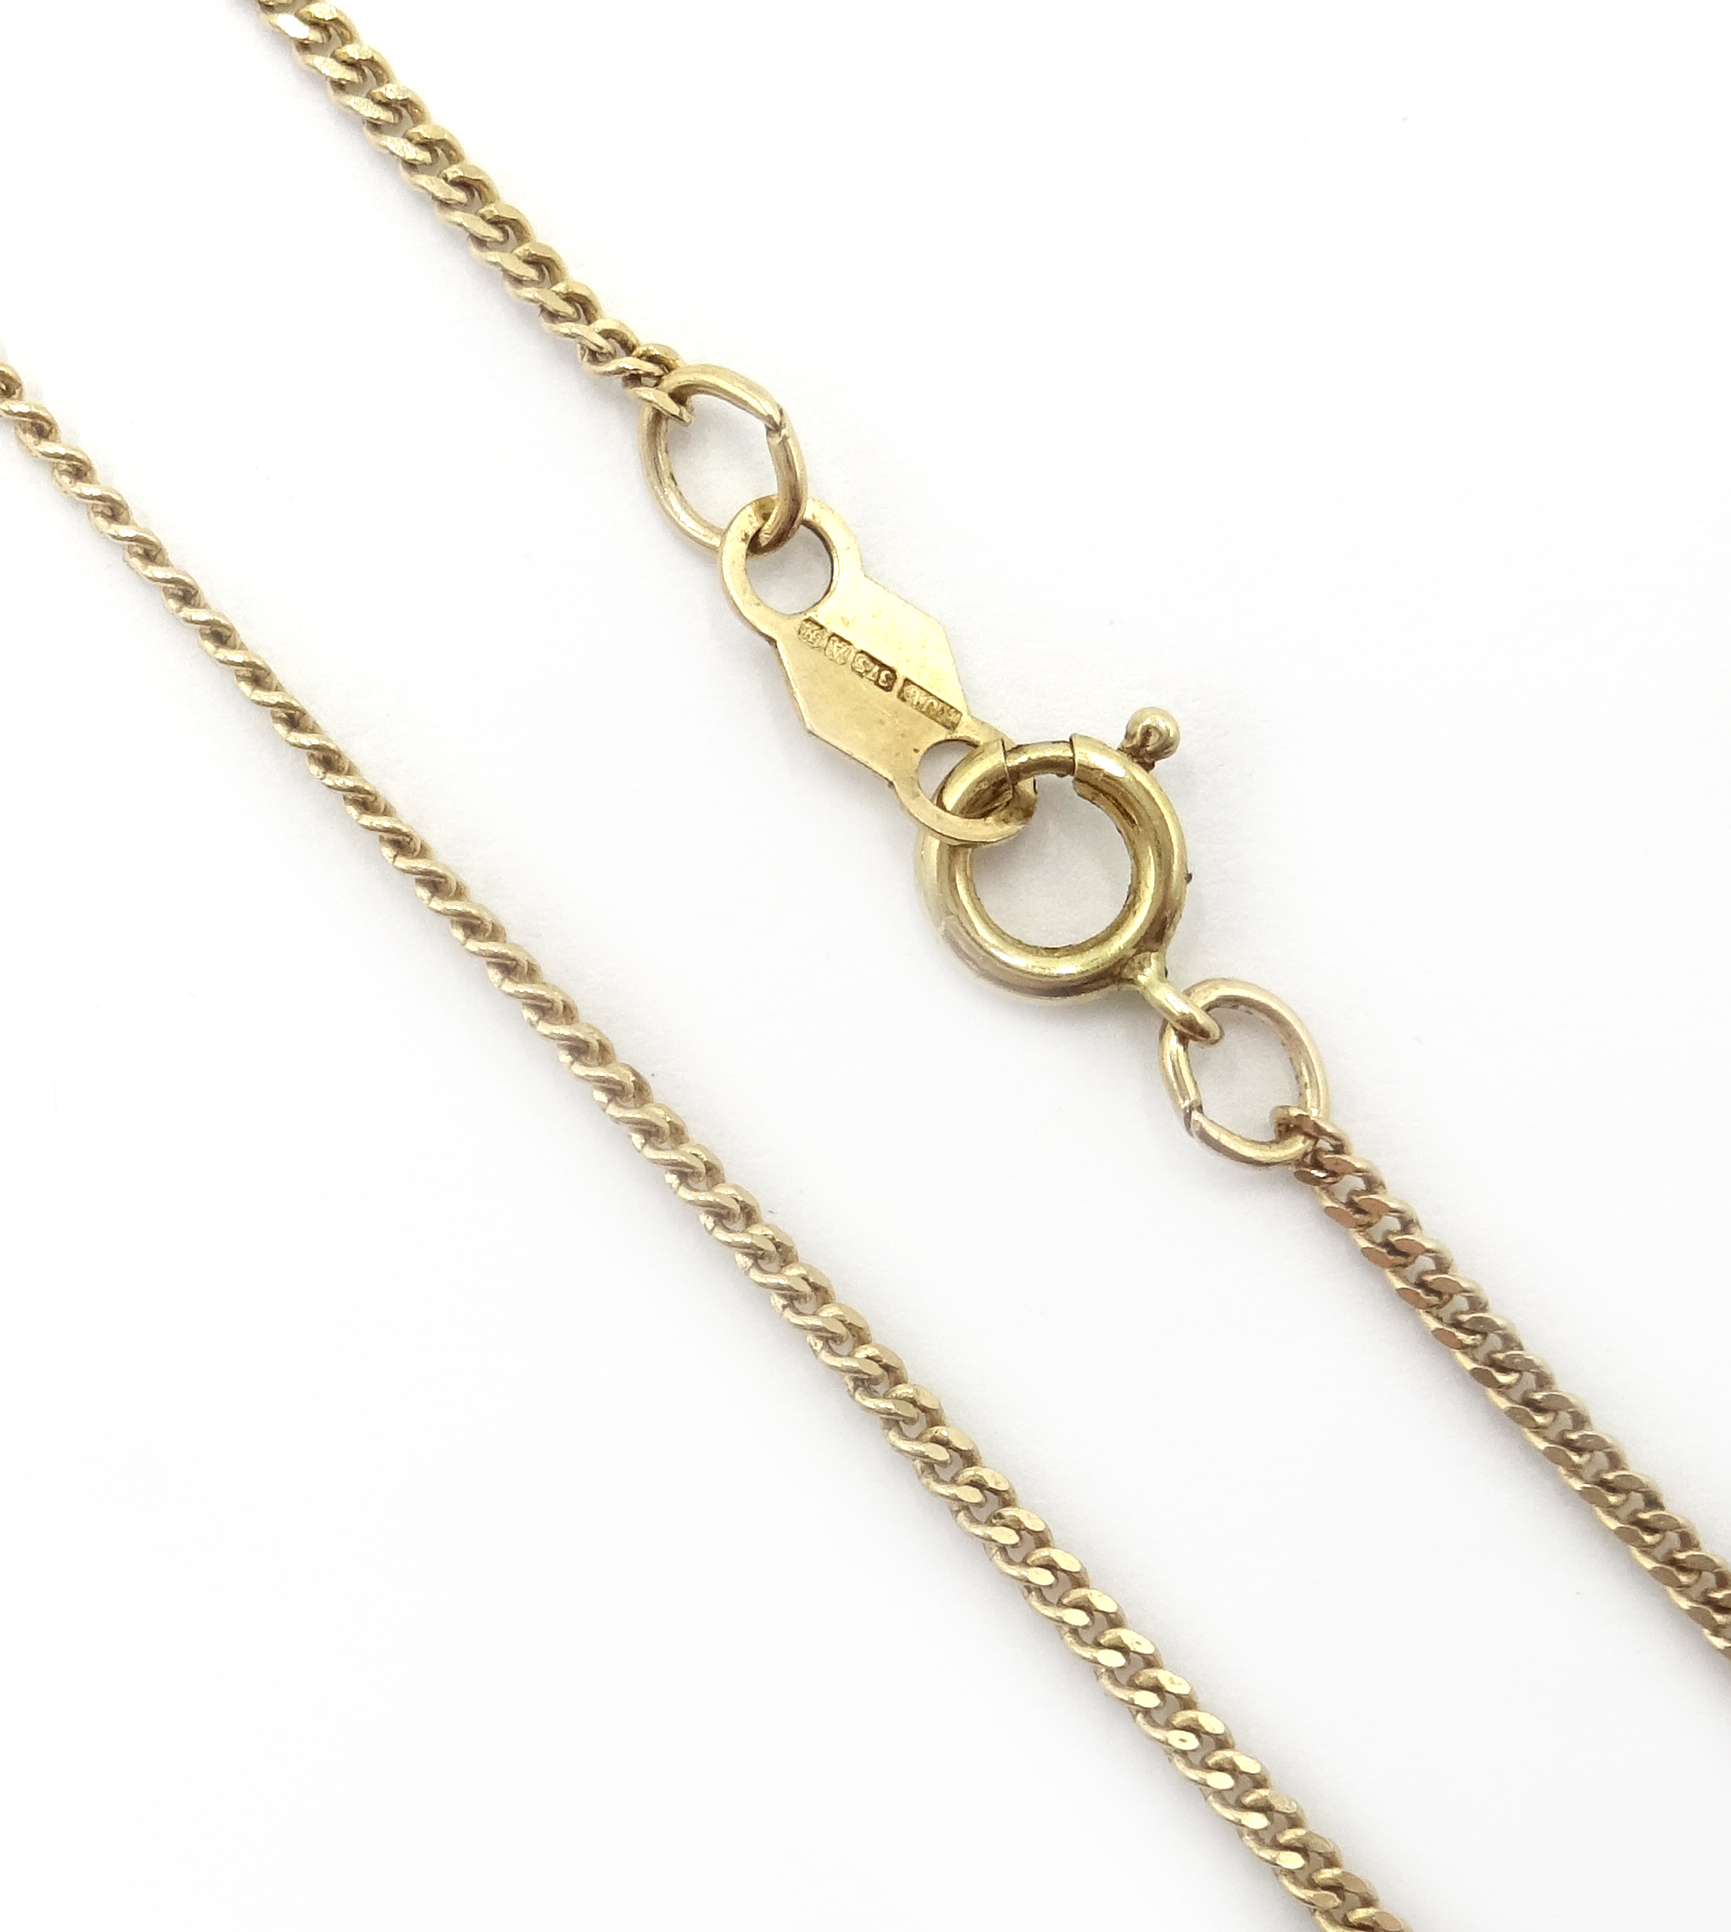 Stone set pendant on 9ct gold necklace chain, hallmarked and silver-gilt double chain necklace, - Image 5 of 5